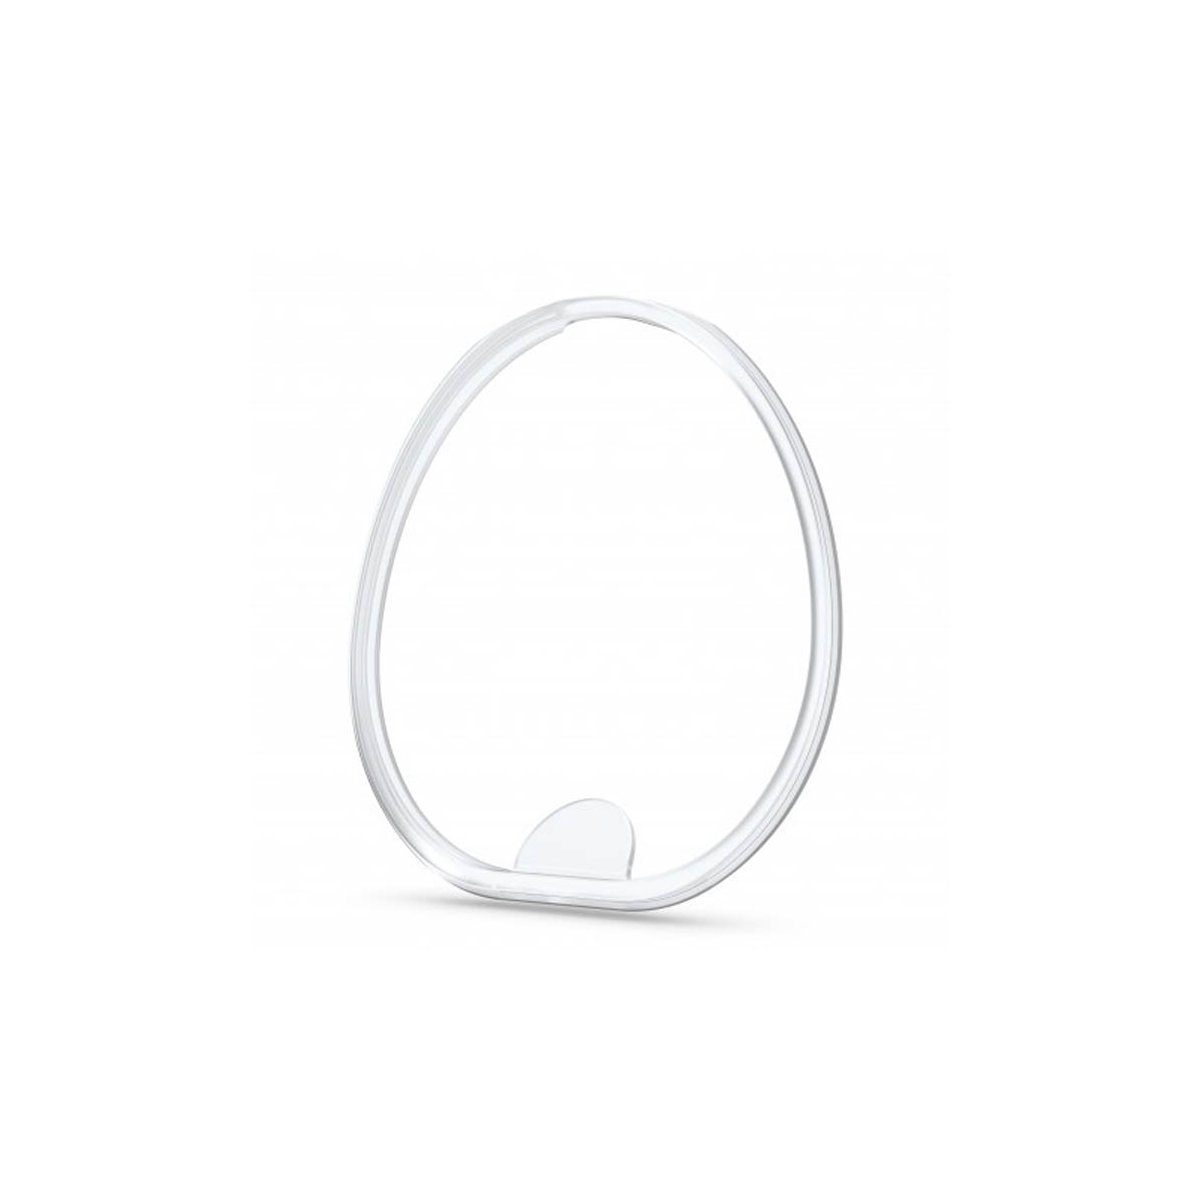 Medela O Ring For Hands Free Collection Cups